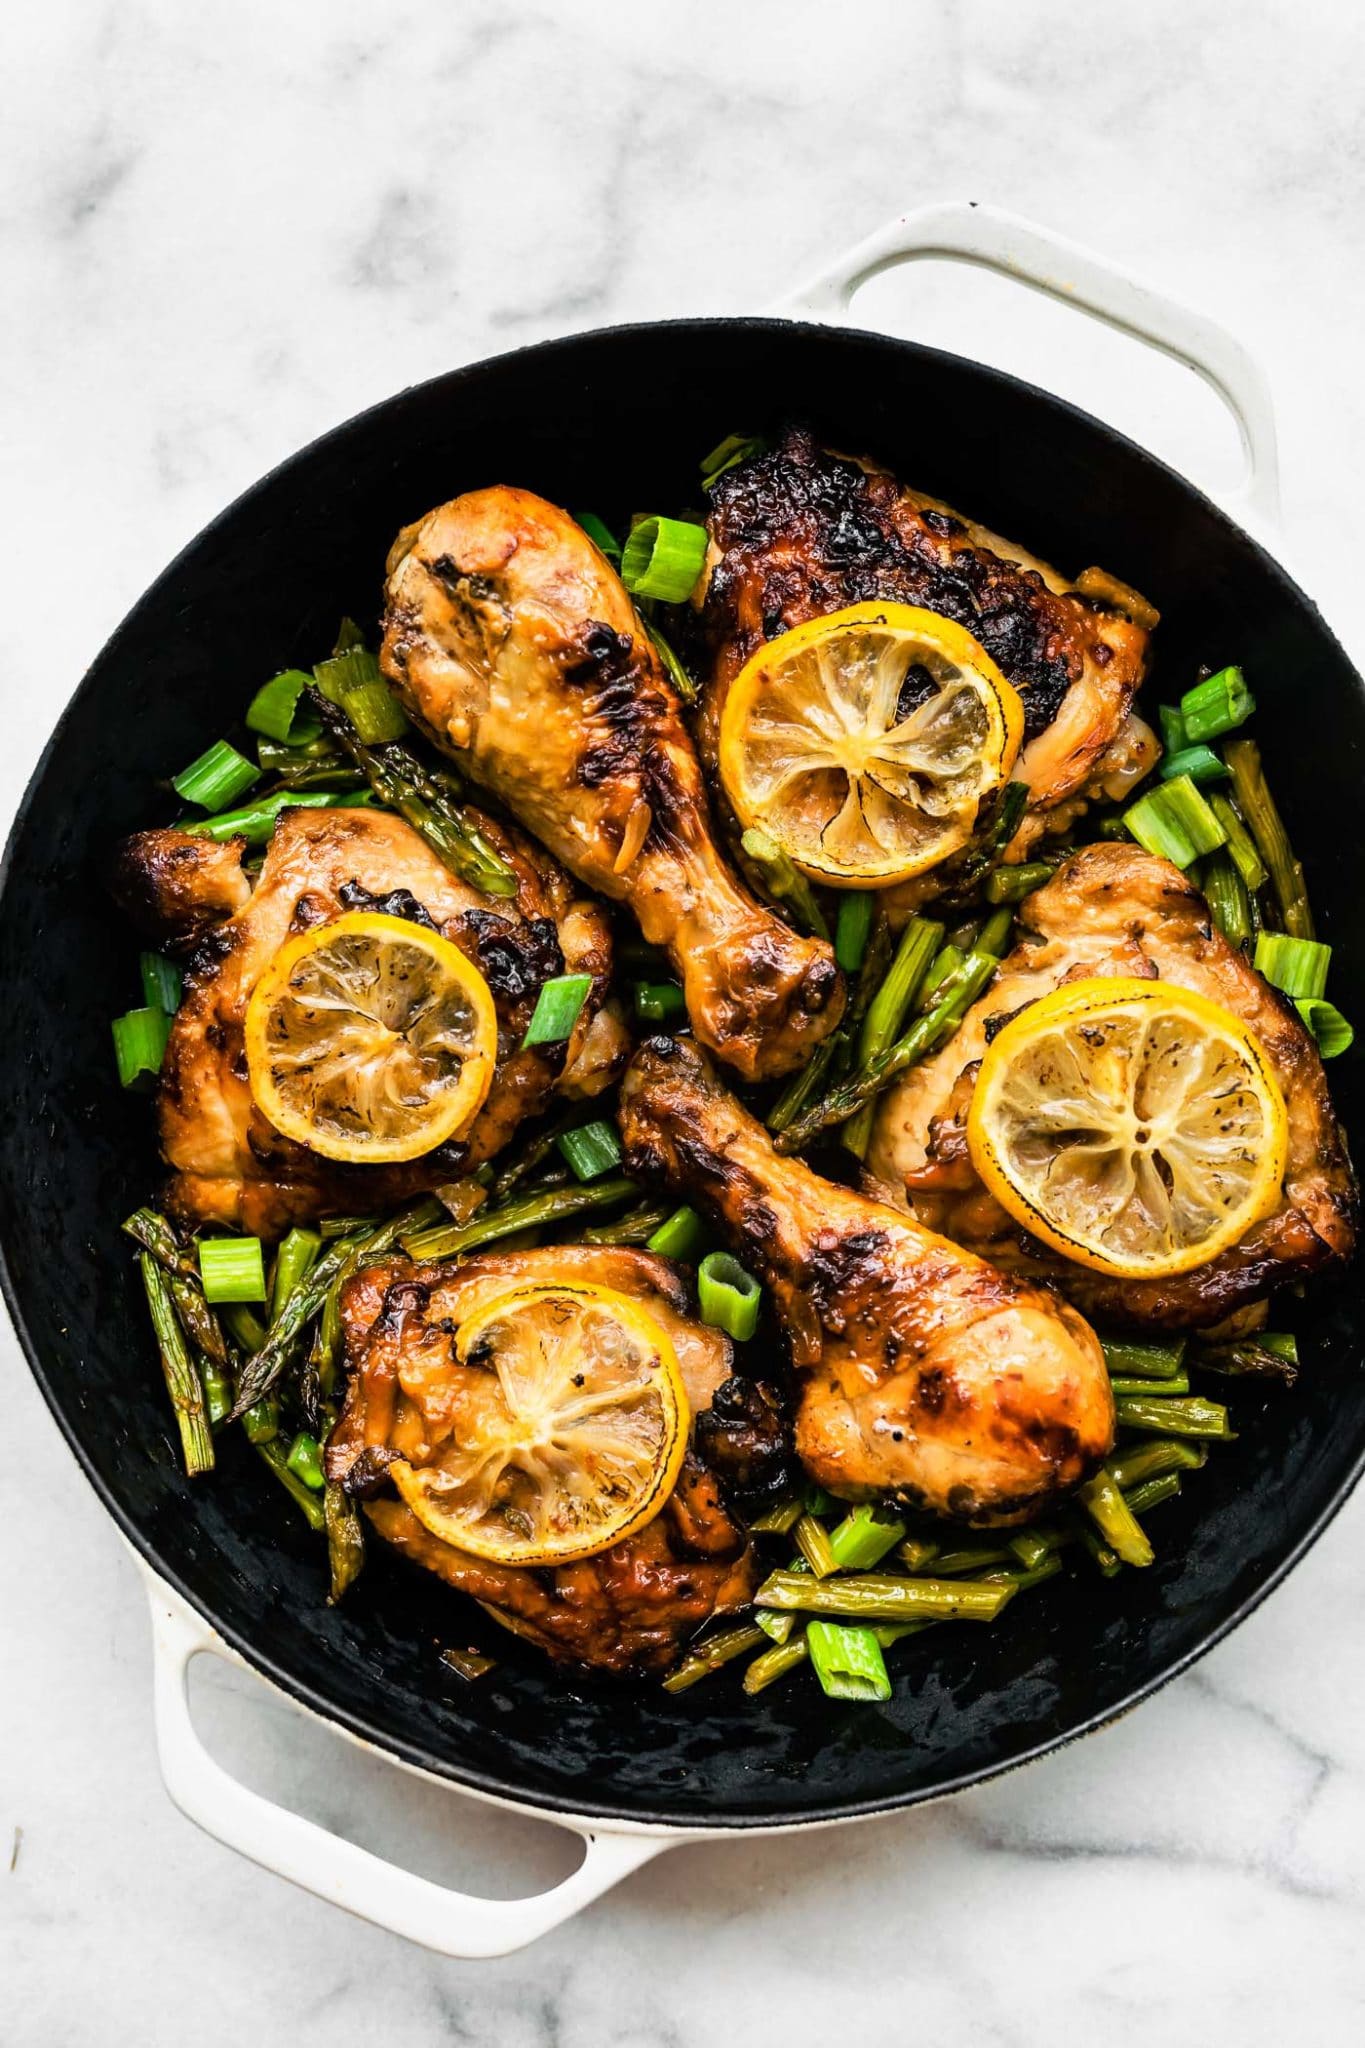 4 thighs and 2 drumsticks of honey ginger air fryer chicken in a pot on top of air fried asparagus topped with lemon slices and green onions